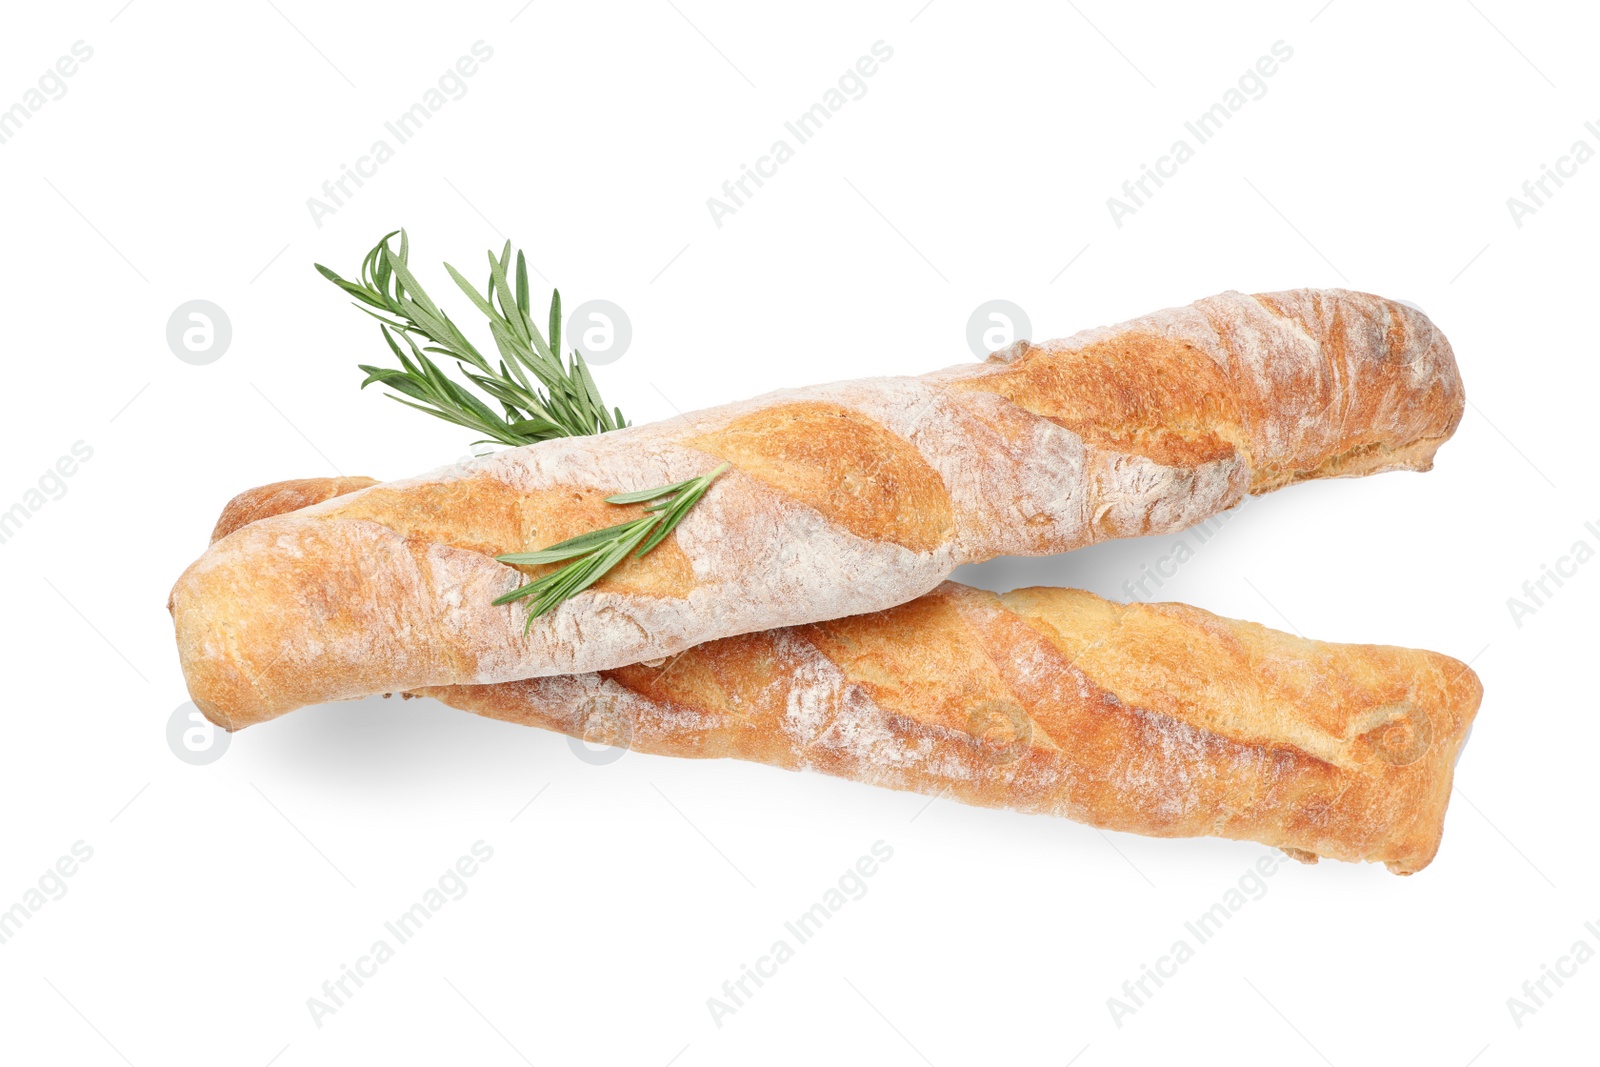 Photo of Crispy French baguettes with rosemary on white background, top view. Fresh bread